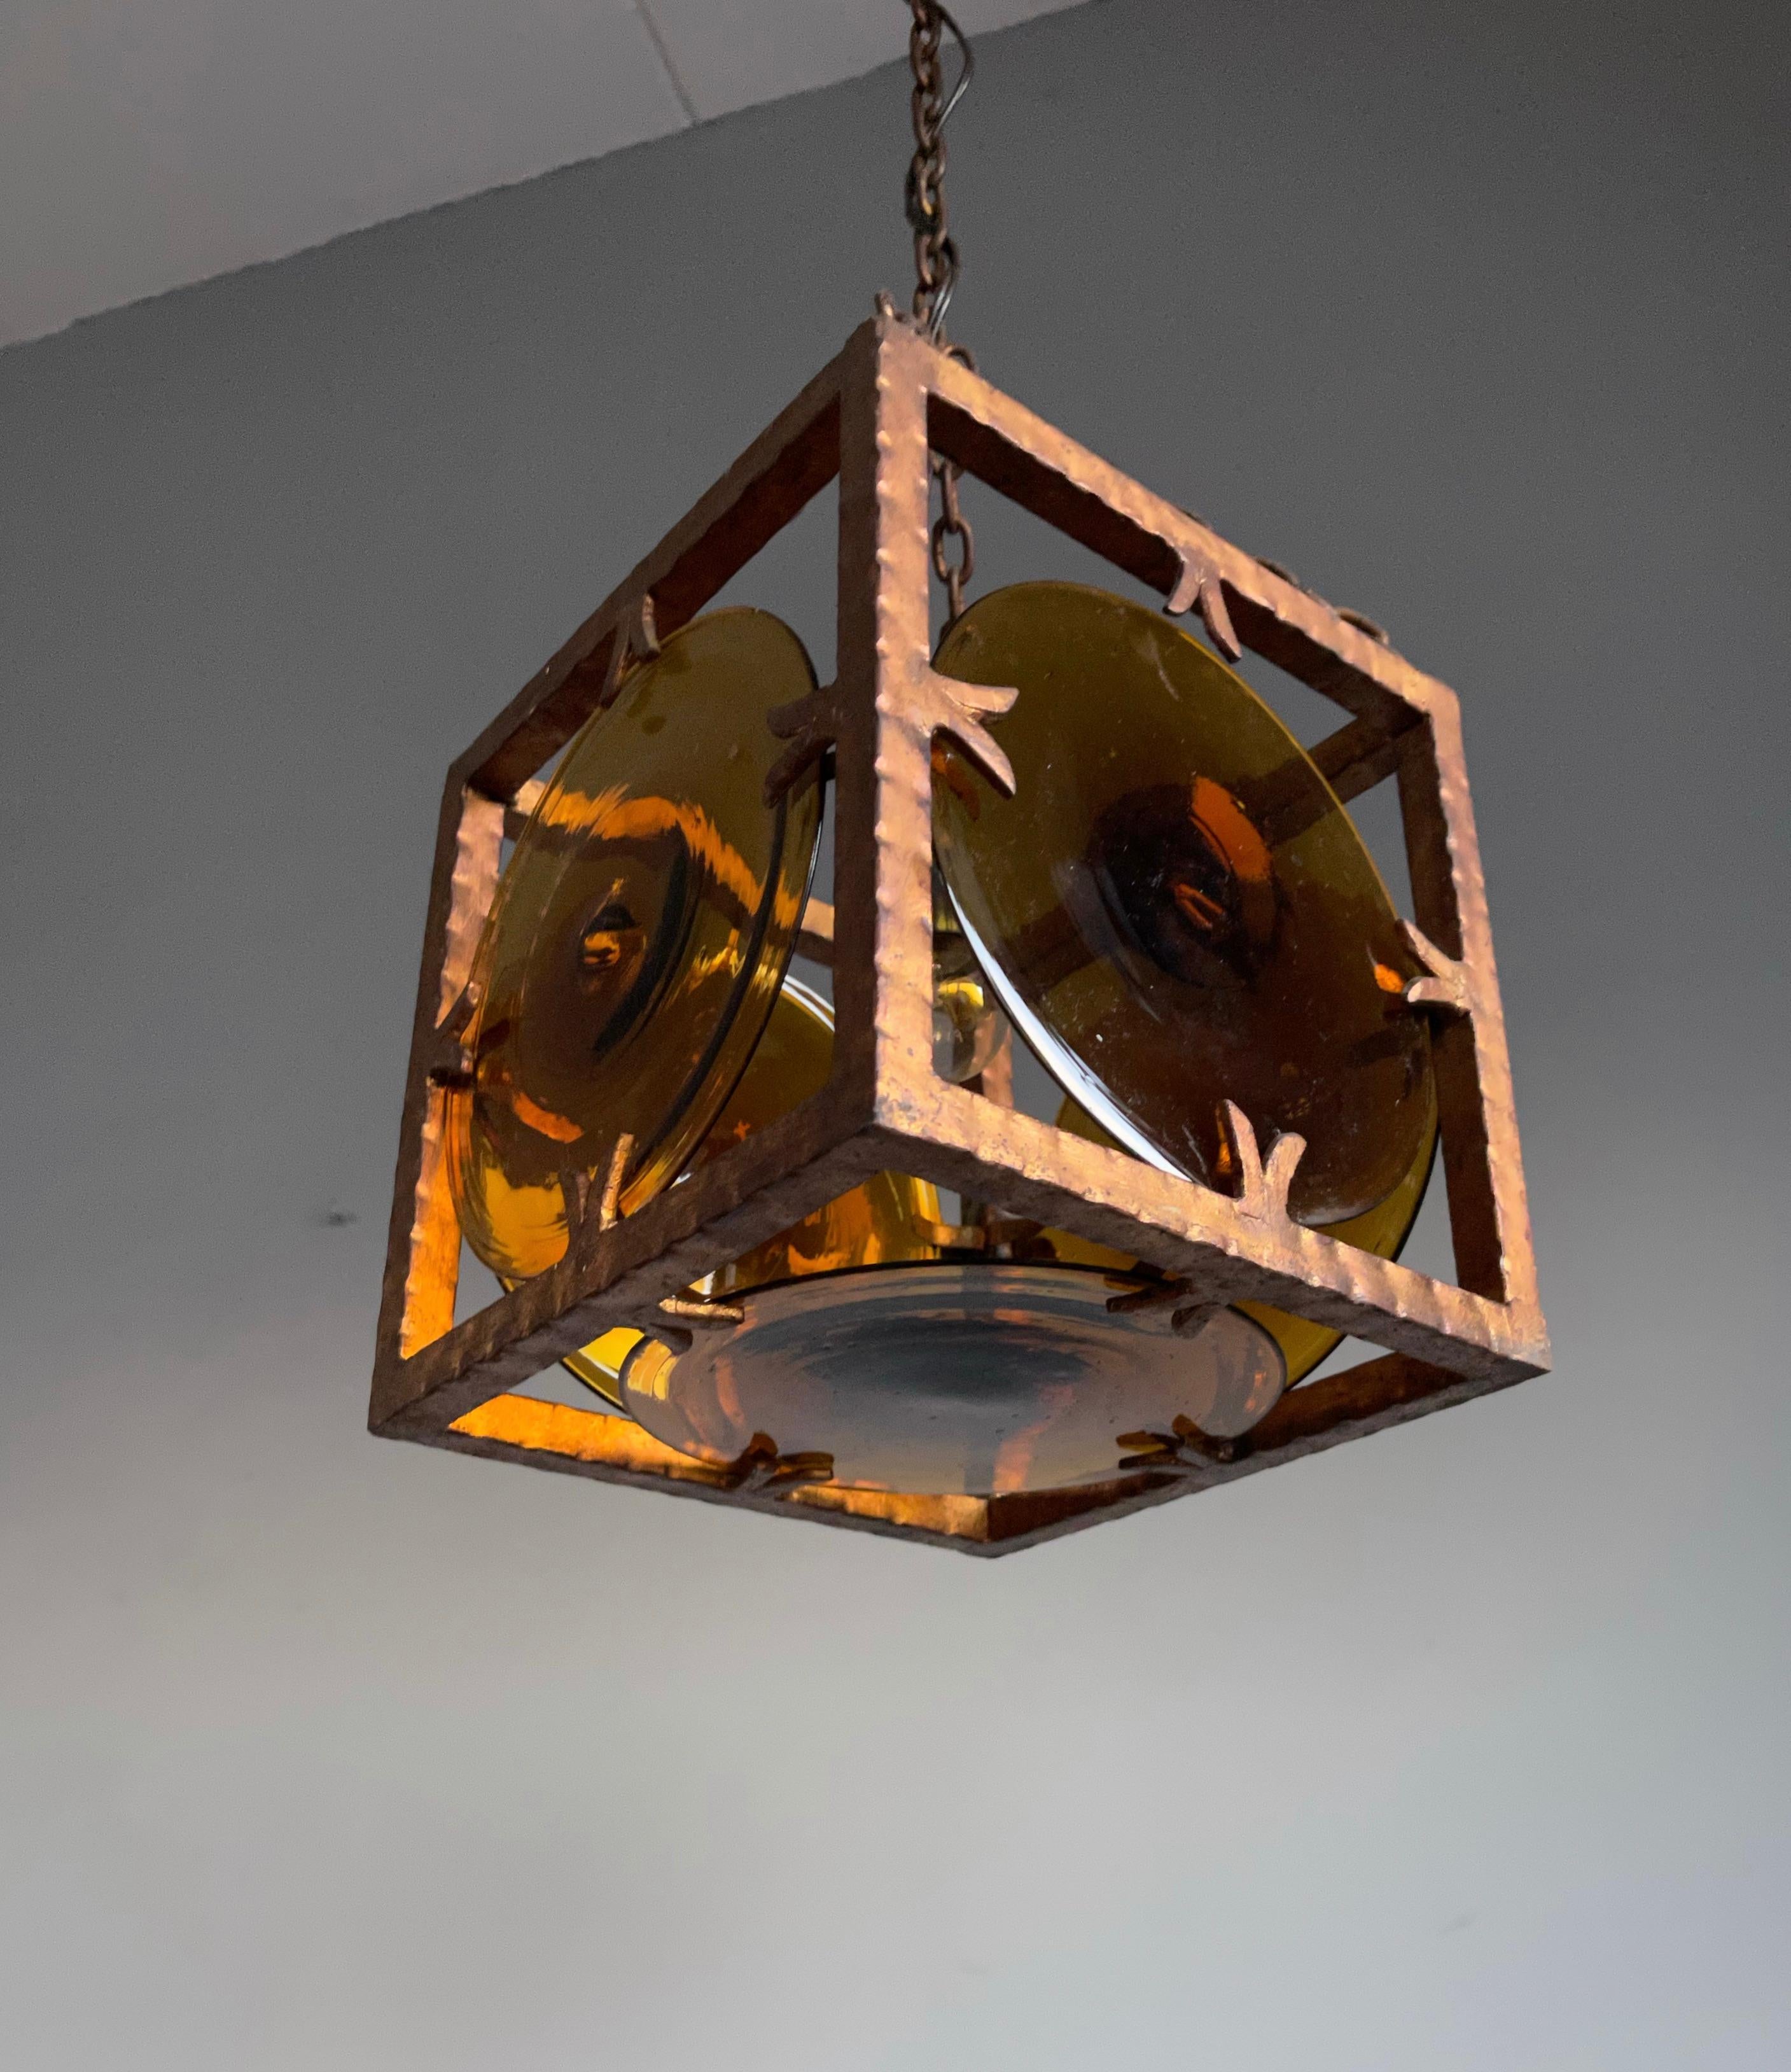 20th Century Midcentury Brutalist Pendant Light with Stunning Murano Mouth Blown Glass Discs